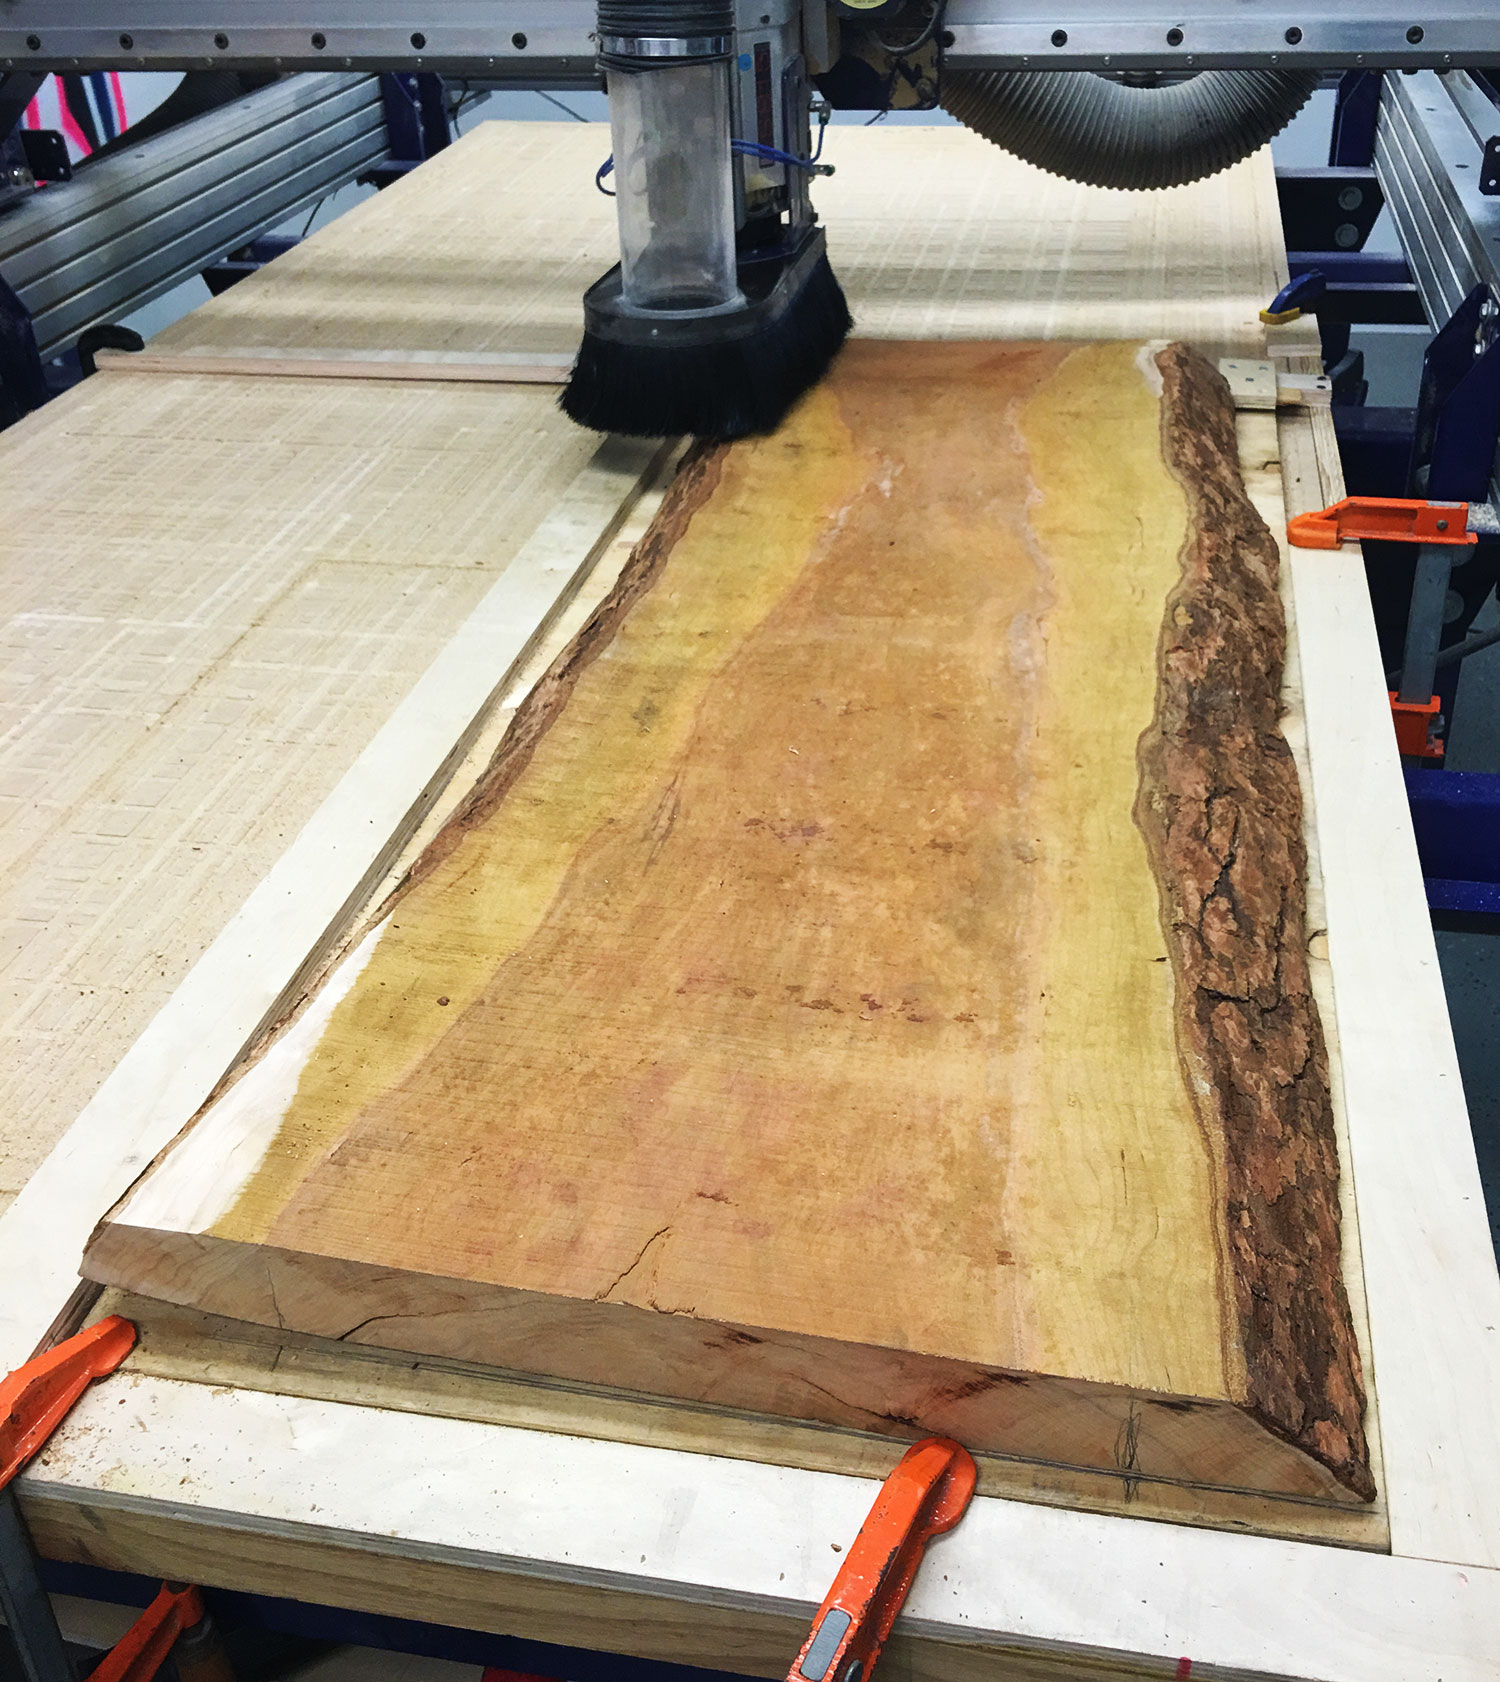 3 axis machine cutting down a piece of live edge wood.